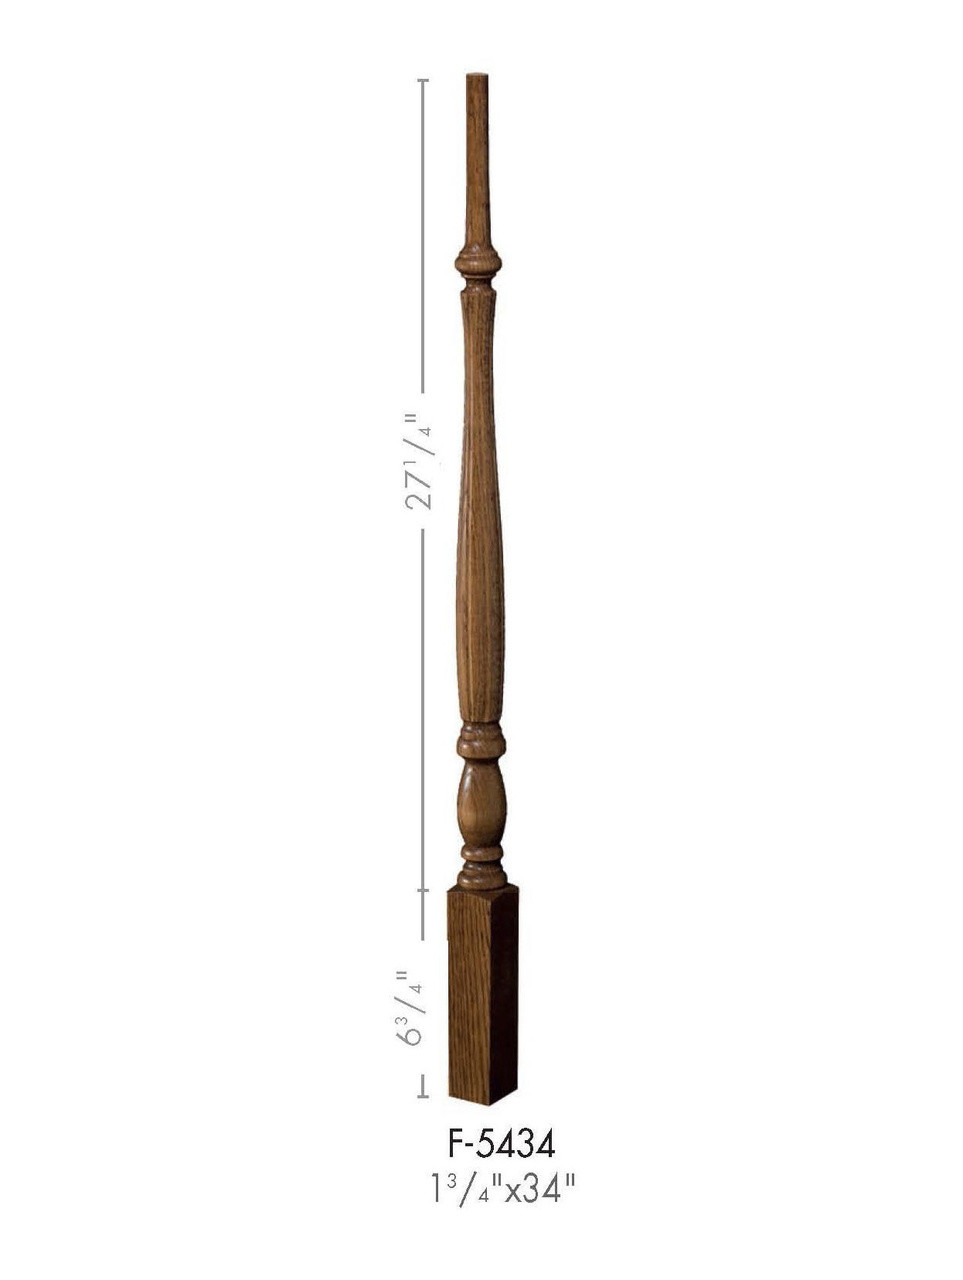 F-5434 34-inch Fluted Country Classic Baluster